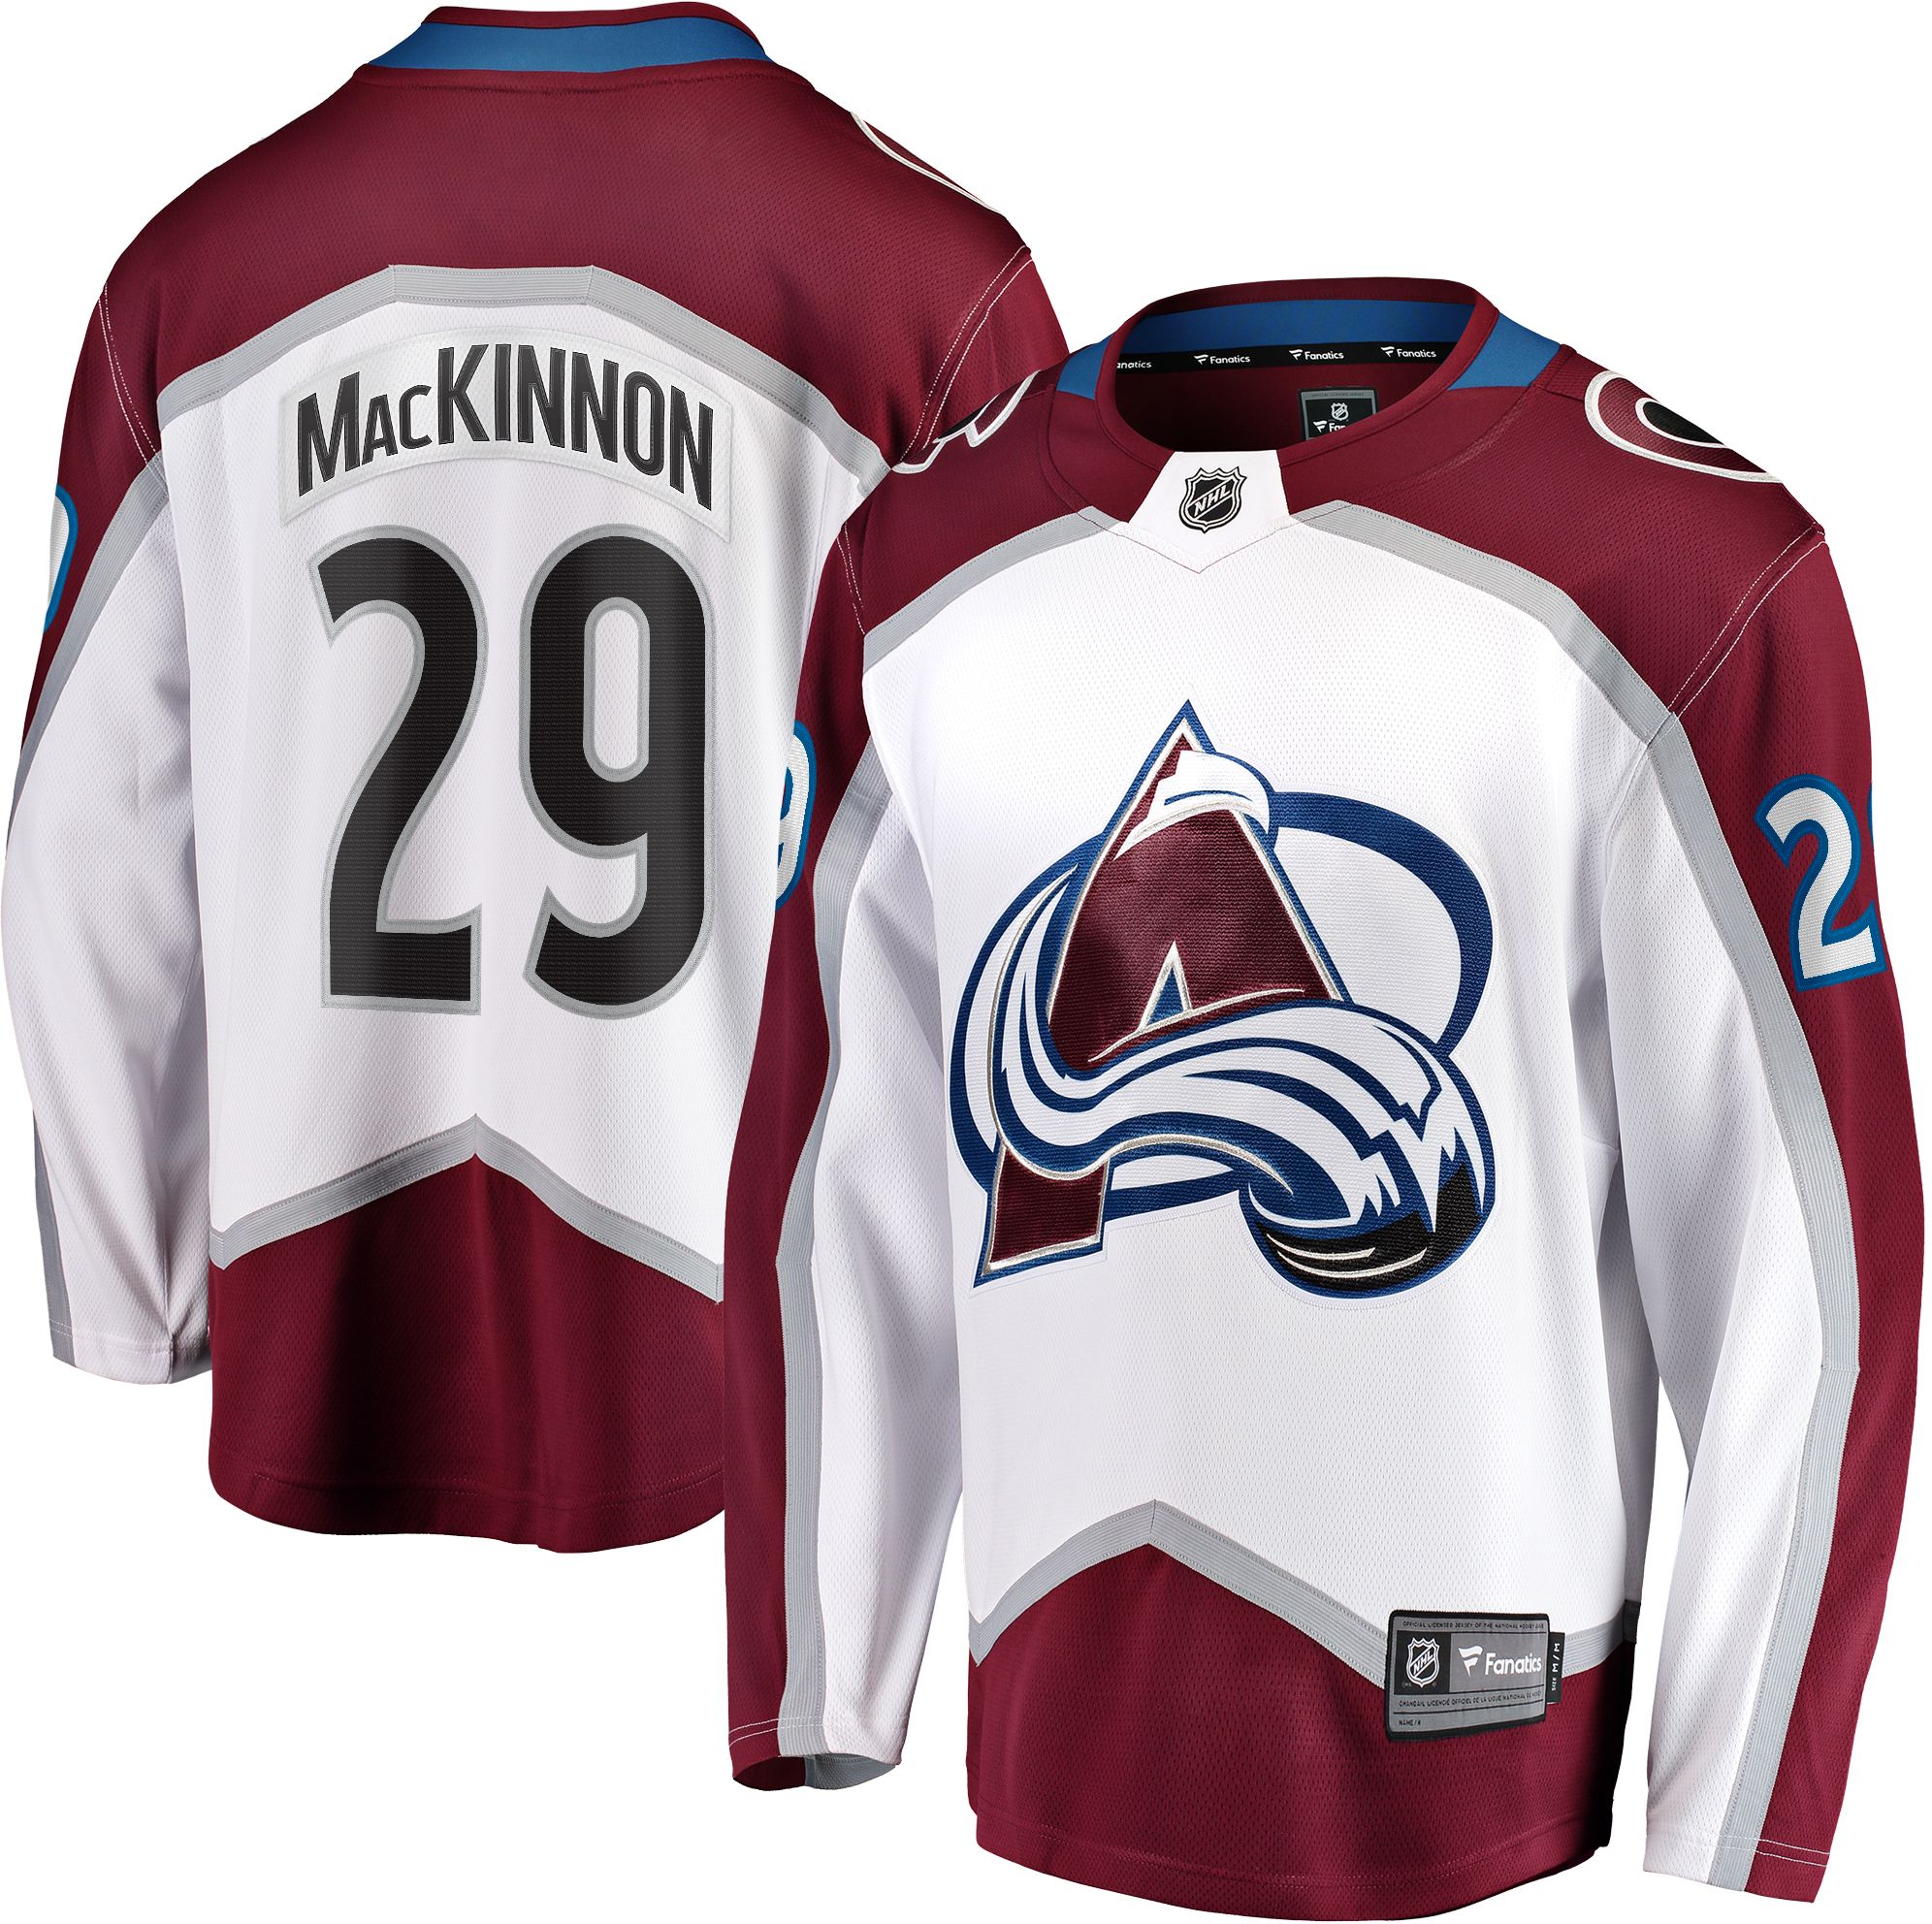 colorado avalanche jerseys off our backs